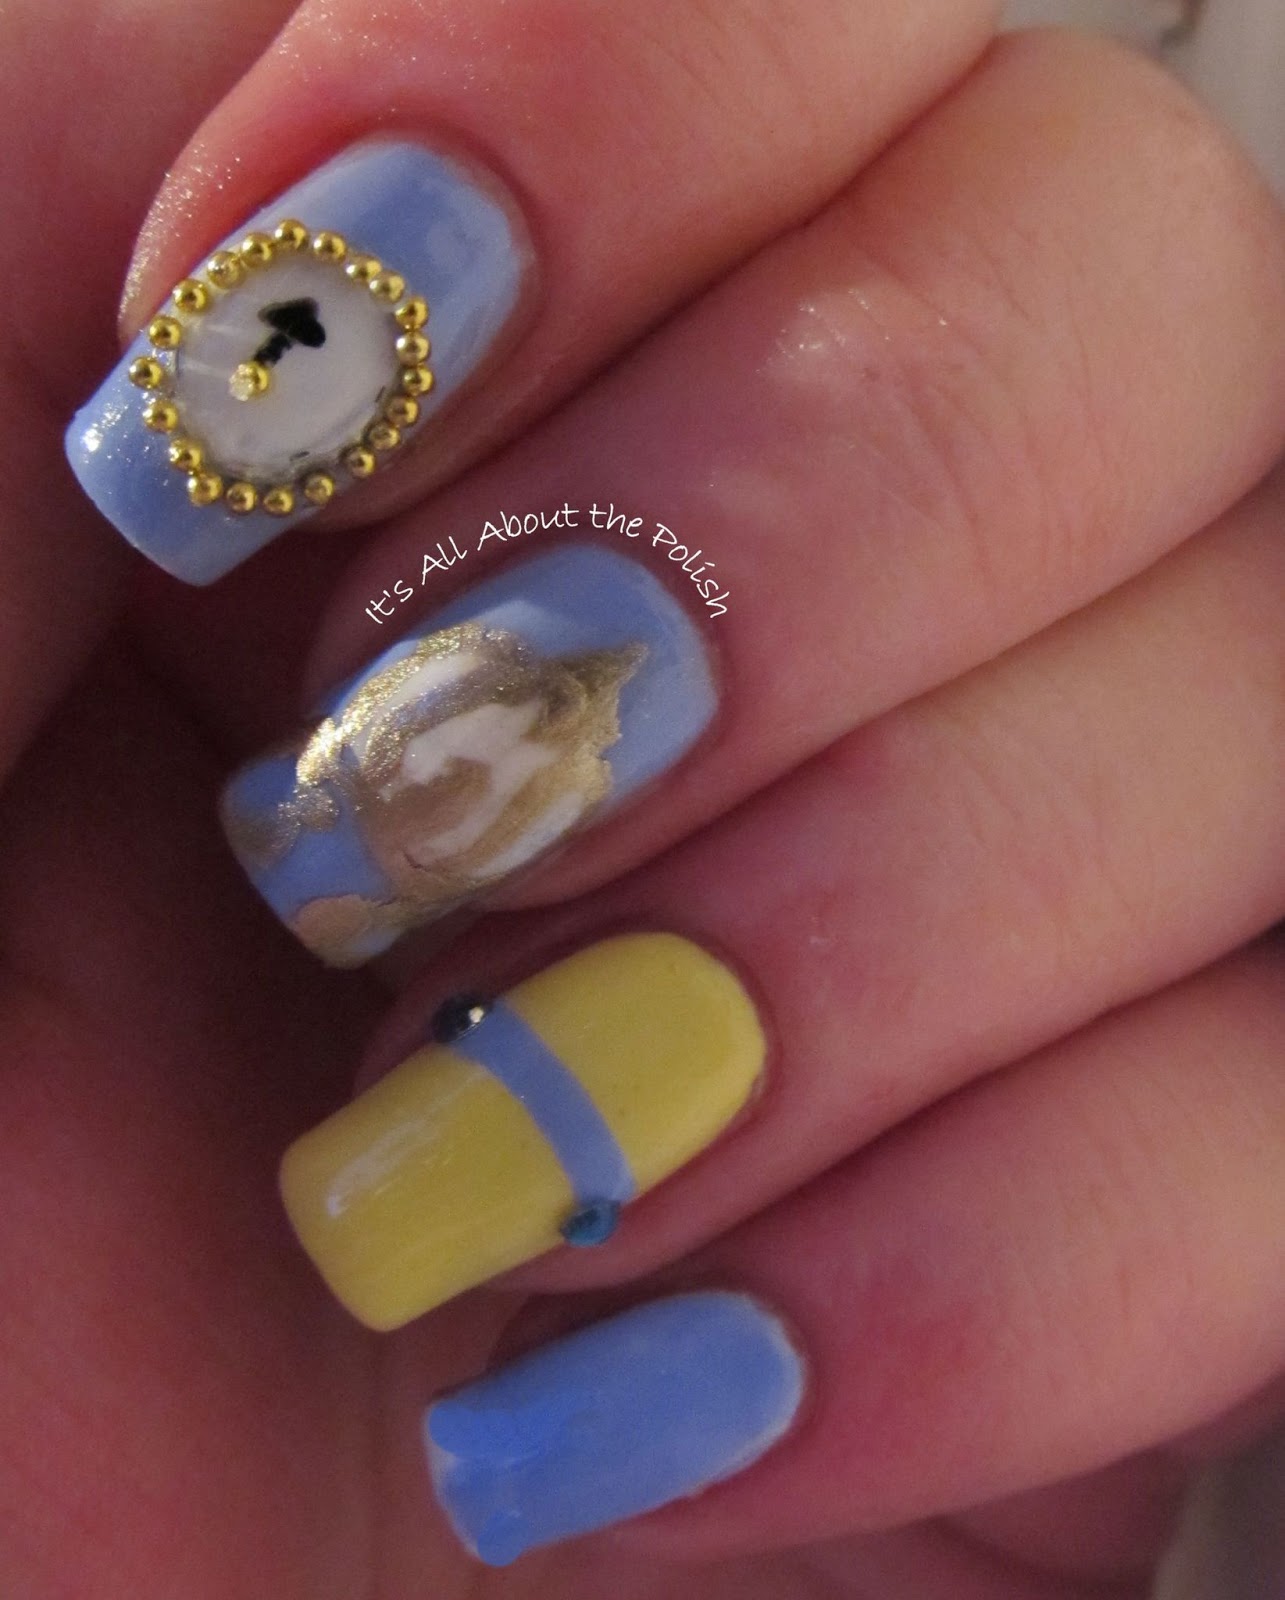 It's all about the polish: Disney Princess Challenge - Cinderella nails